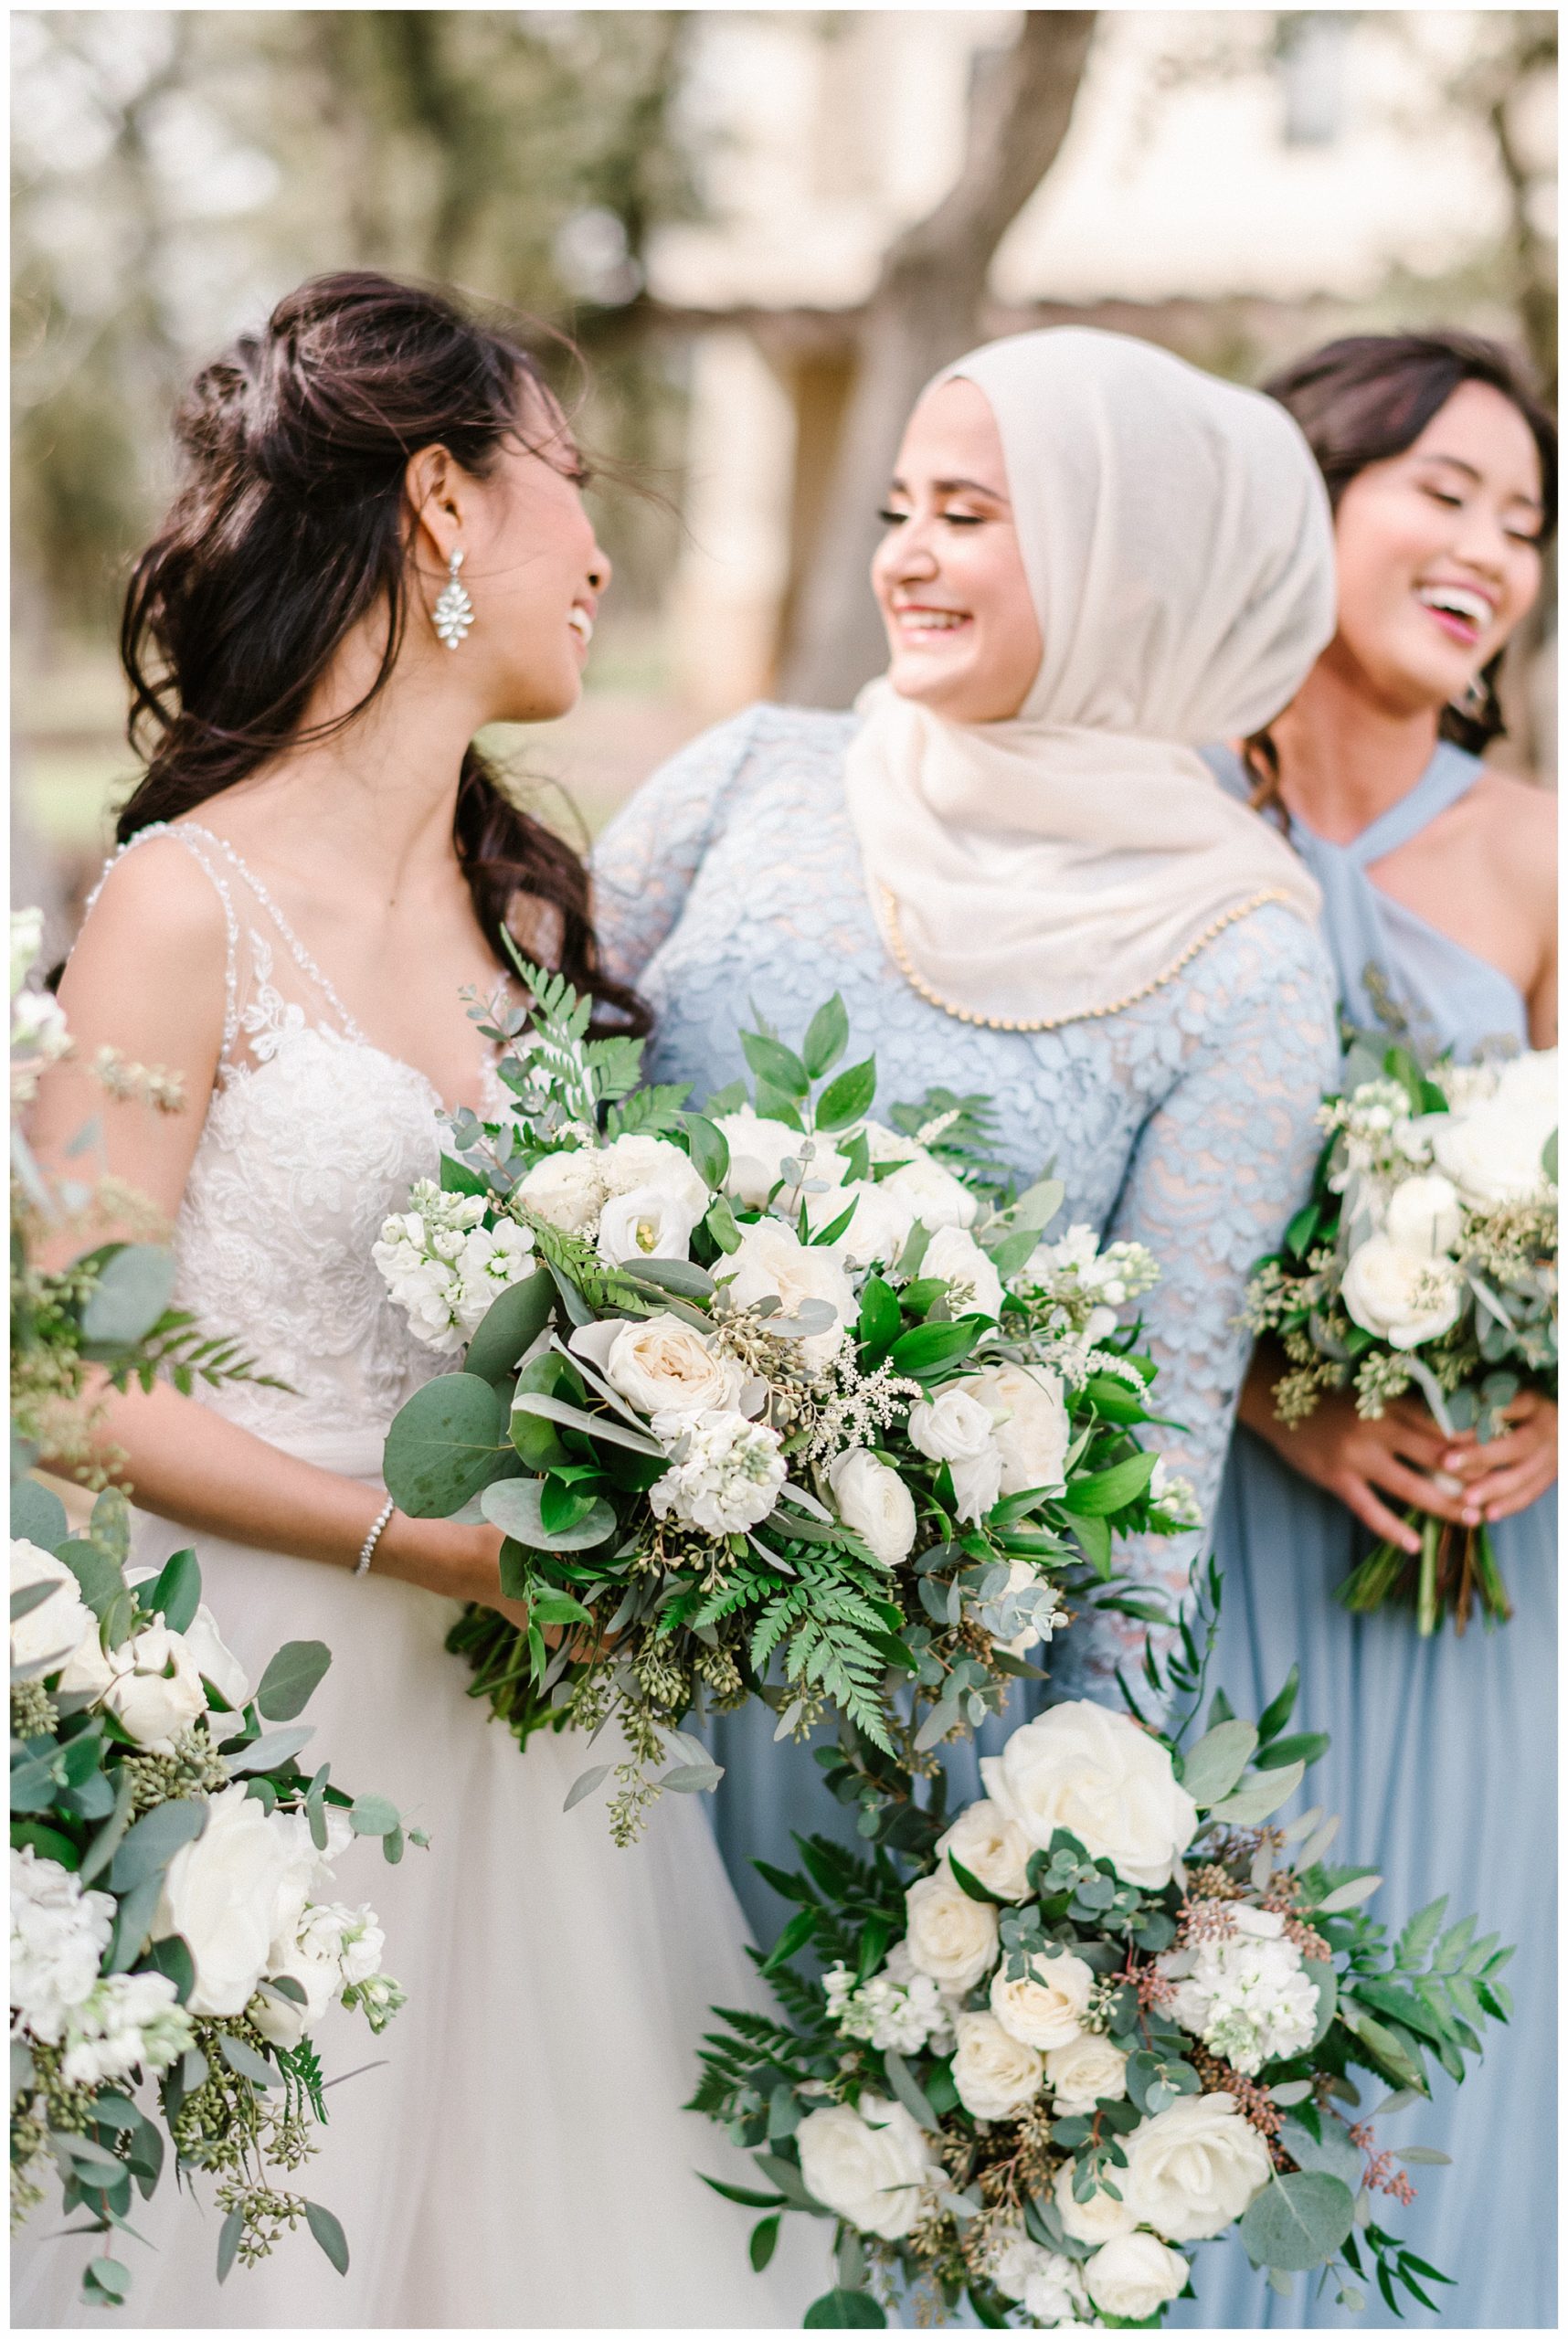 Bride laughing with her Maid of Honor